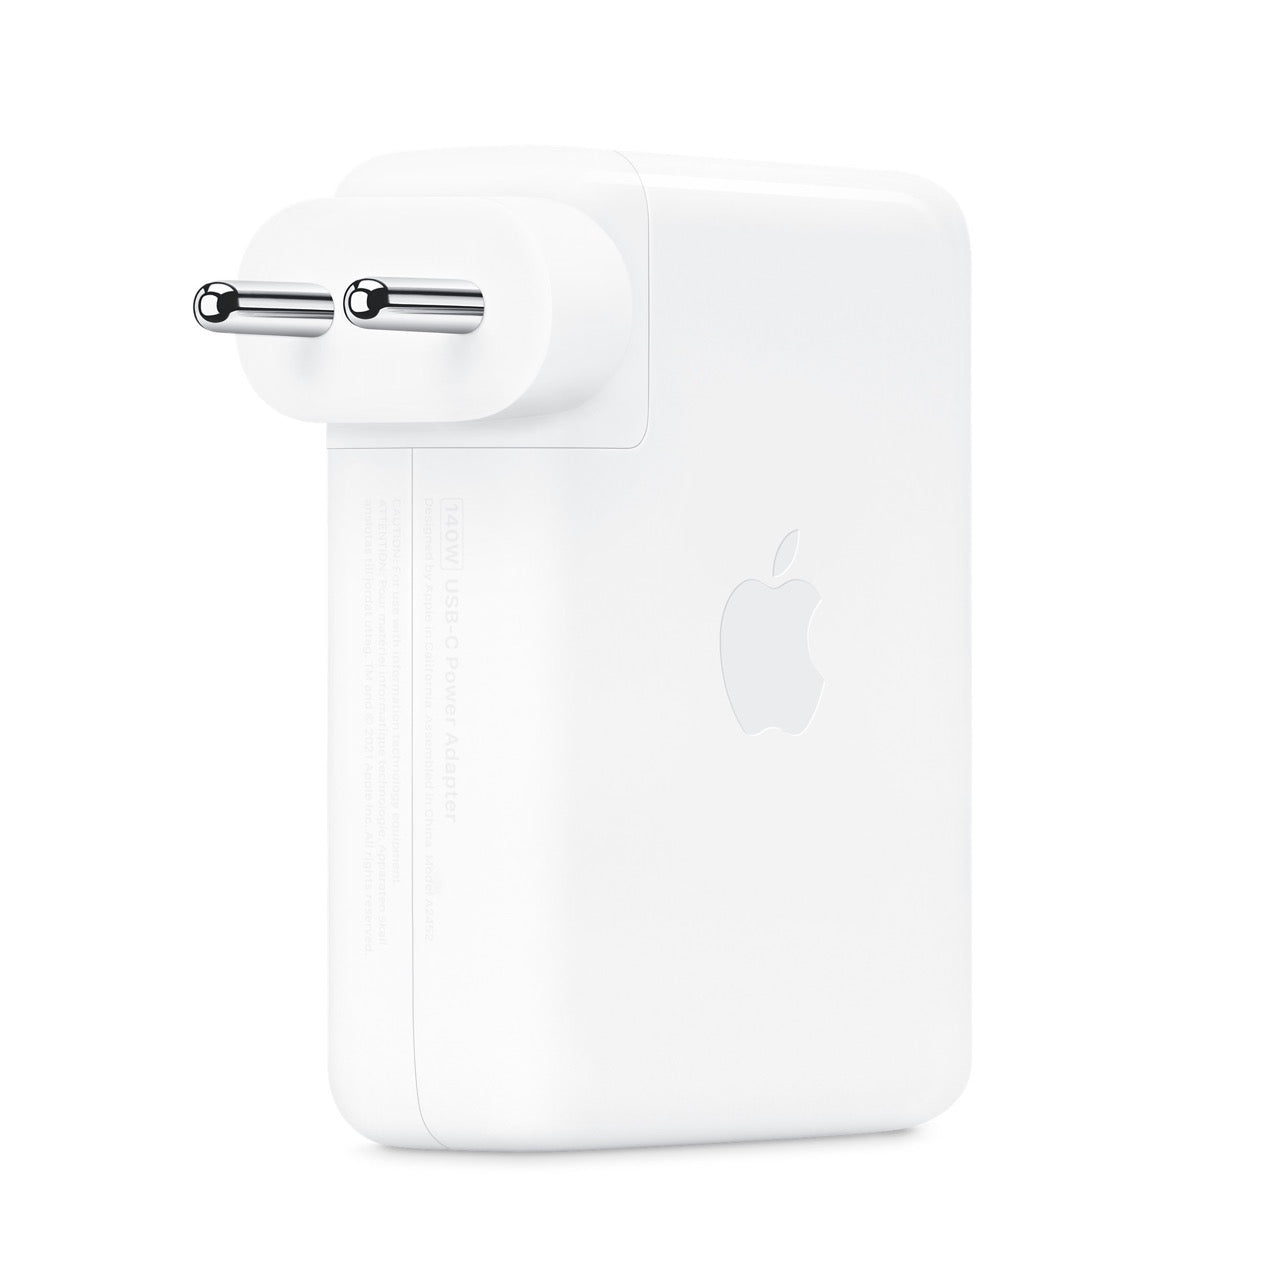 Apple 140W USB-C Power Adapter - QuickTech.in